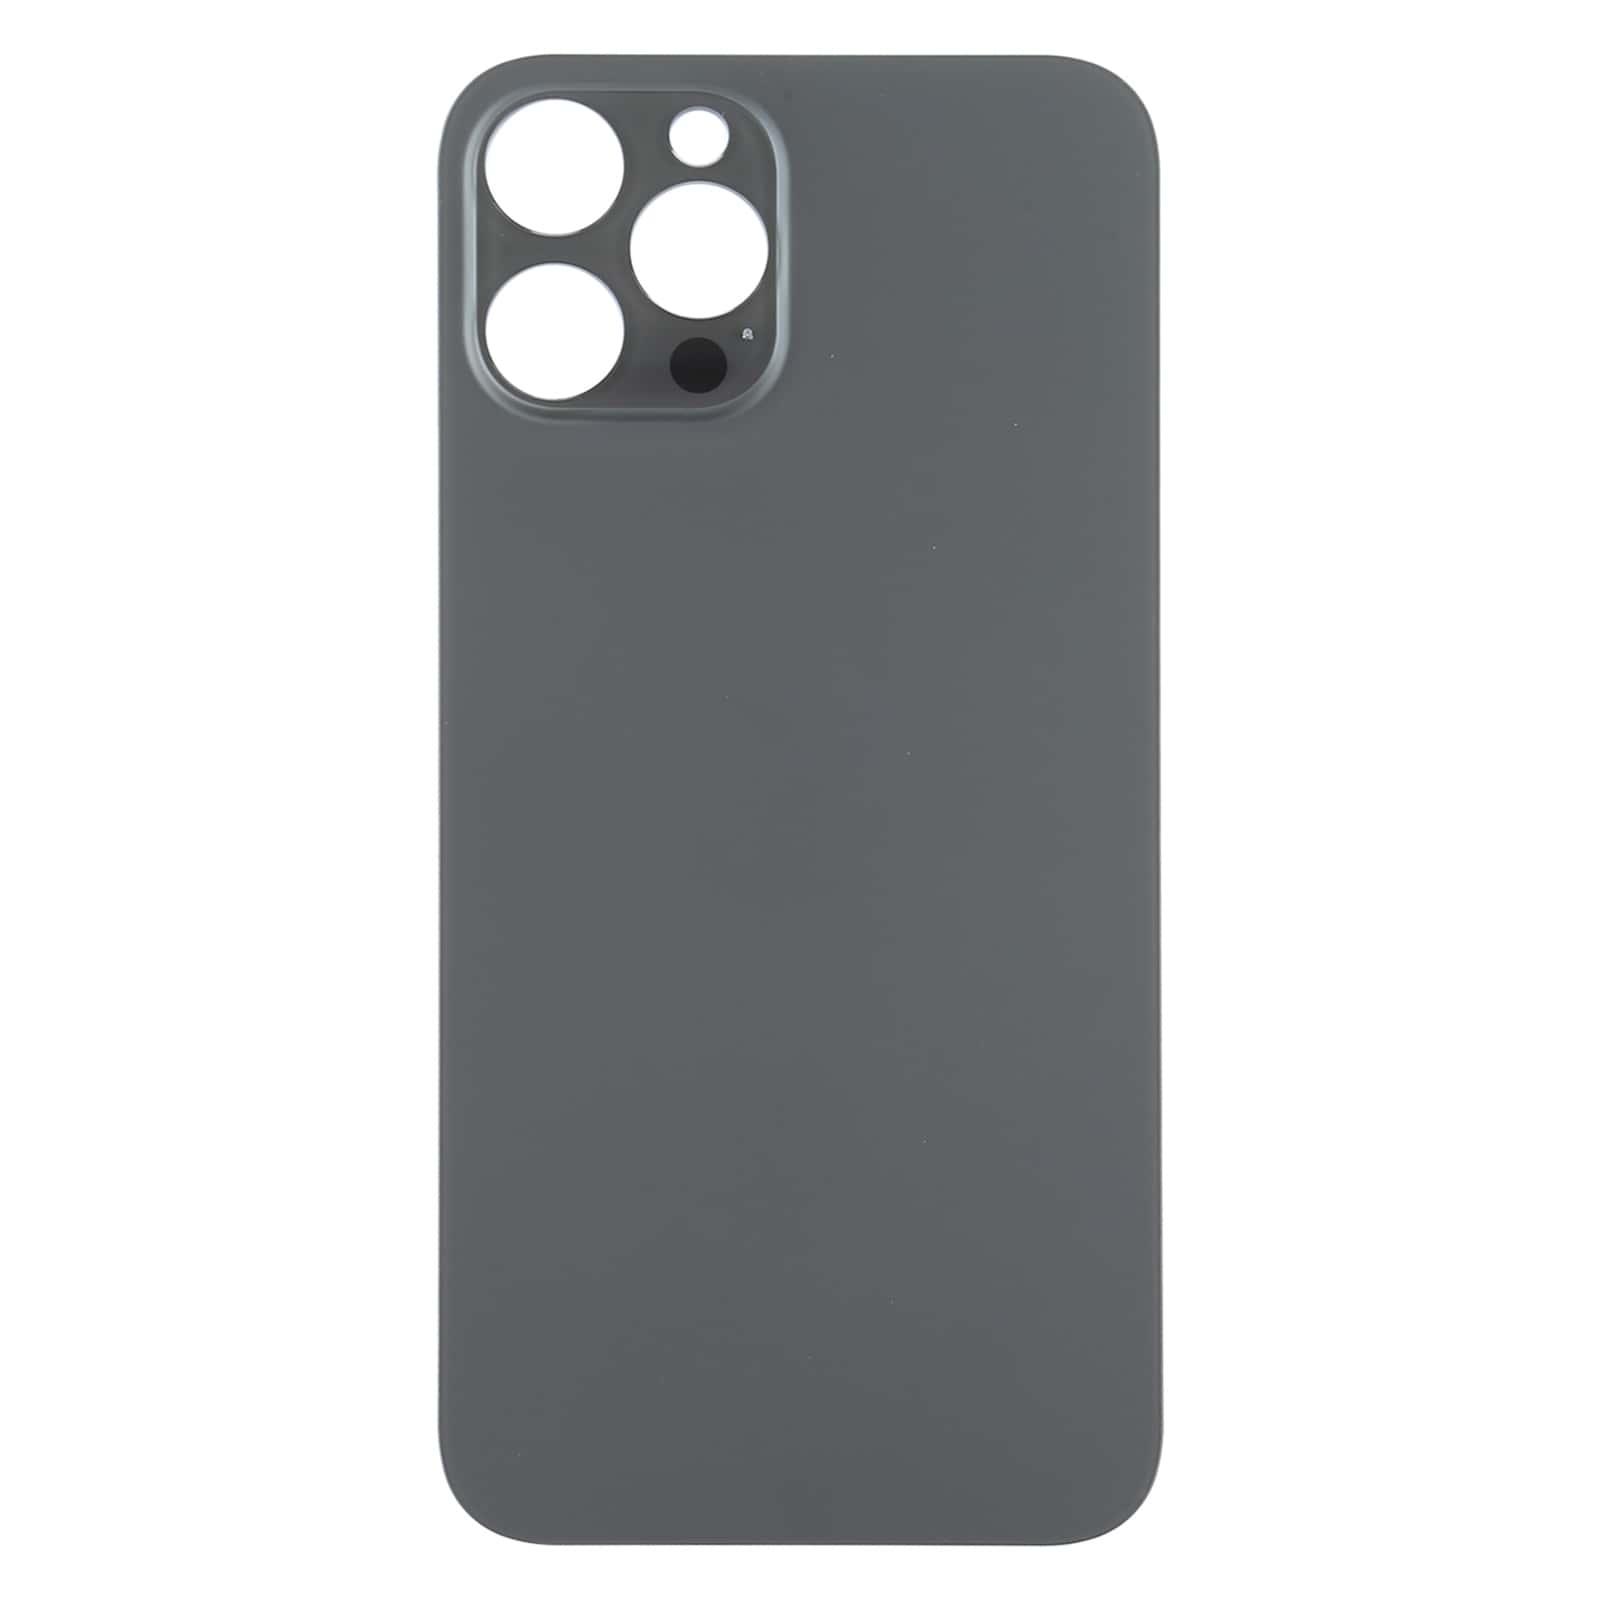 Back Glass Panel for iPhone 12 Pro Max Graphite Big Camera Hole